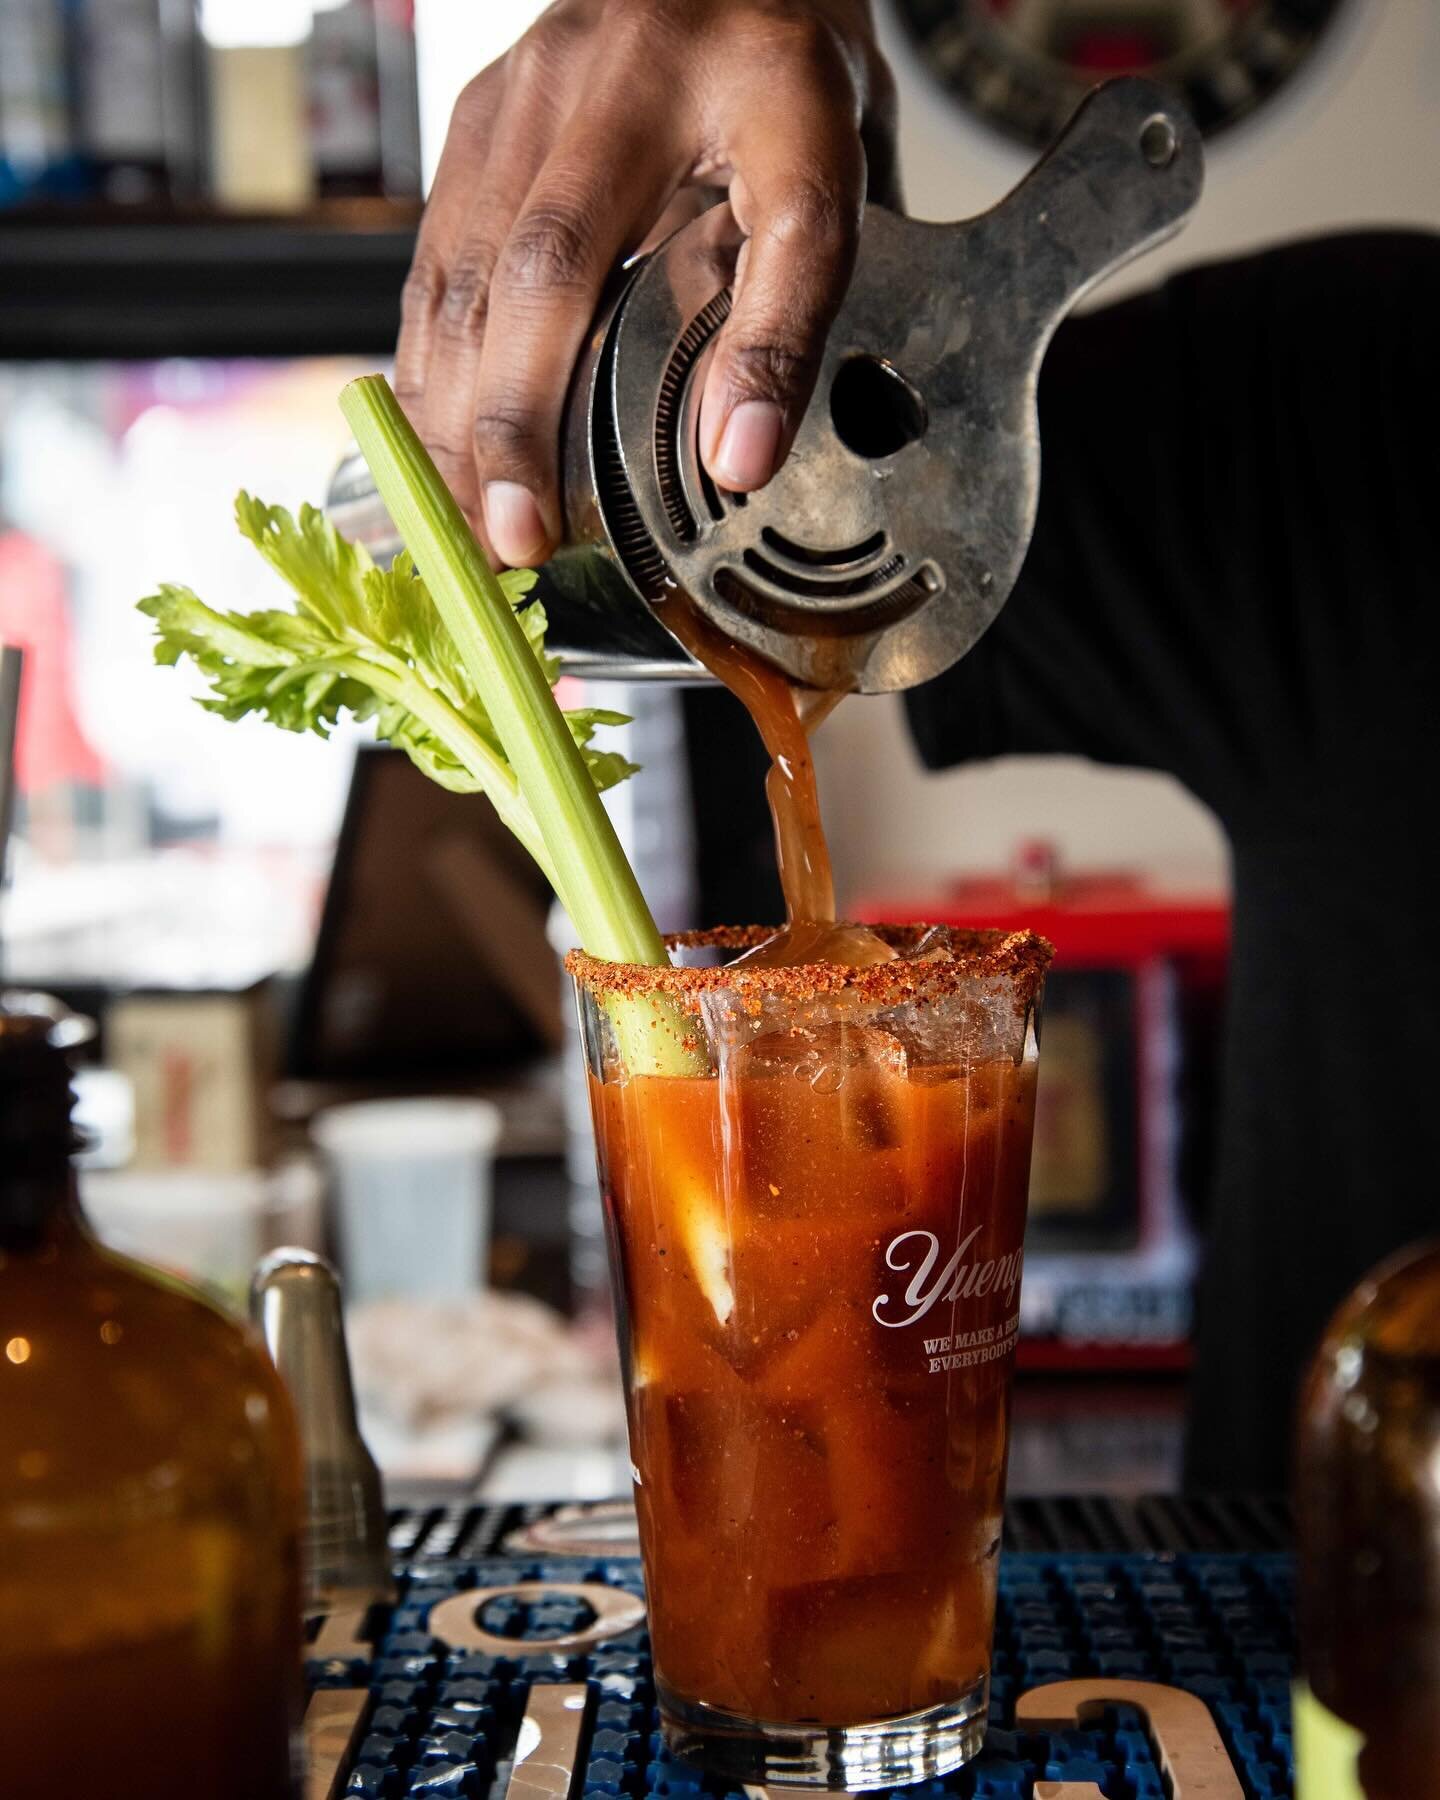 Sundays are for BBQ and Bloody Marys. Come see us in @summerhill_atl!
📷: @dominiquewhitephoto for @grubfreaks #woodschapelbbq #summerhillatl #atlbbq #atlantabbq #bloodymary #bbqbrunch